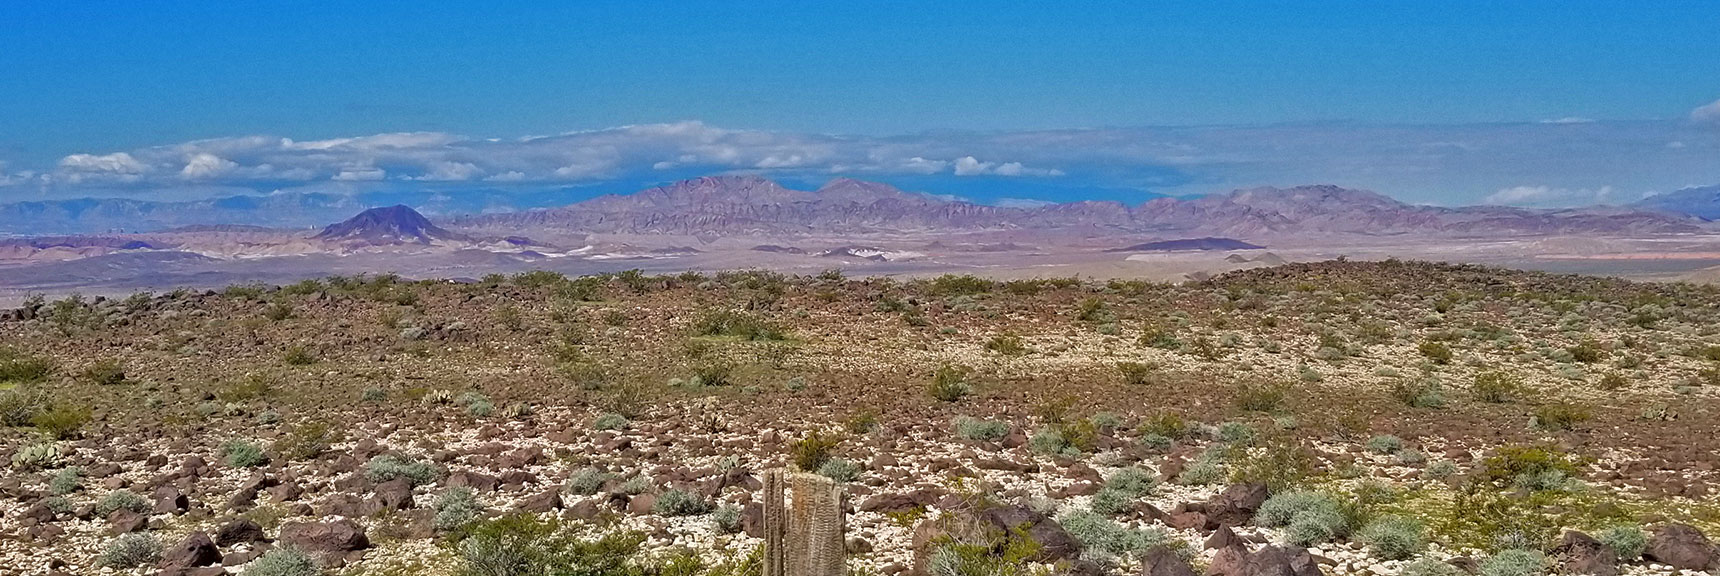 Frenchman Mountain Above Lake Mead National Recreation Area, Nevada, Viewed from Black Mesa Summit